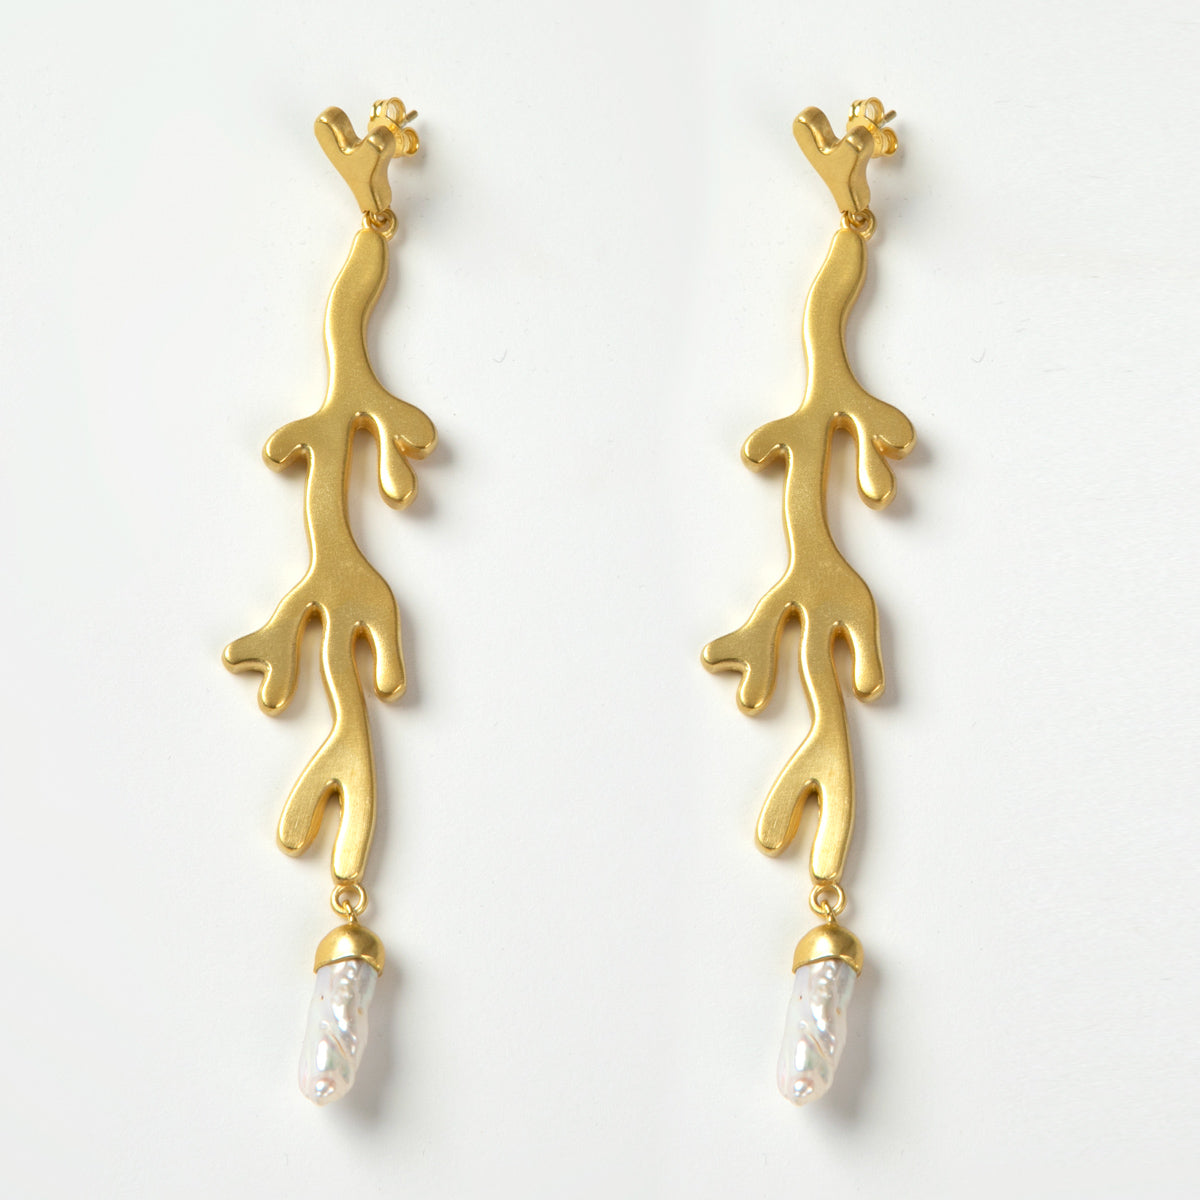 Kalypso earrings silver 925° gold plated 22k by Pearl Martini